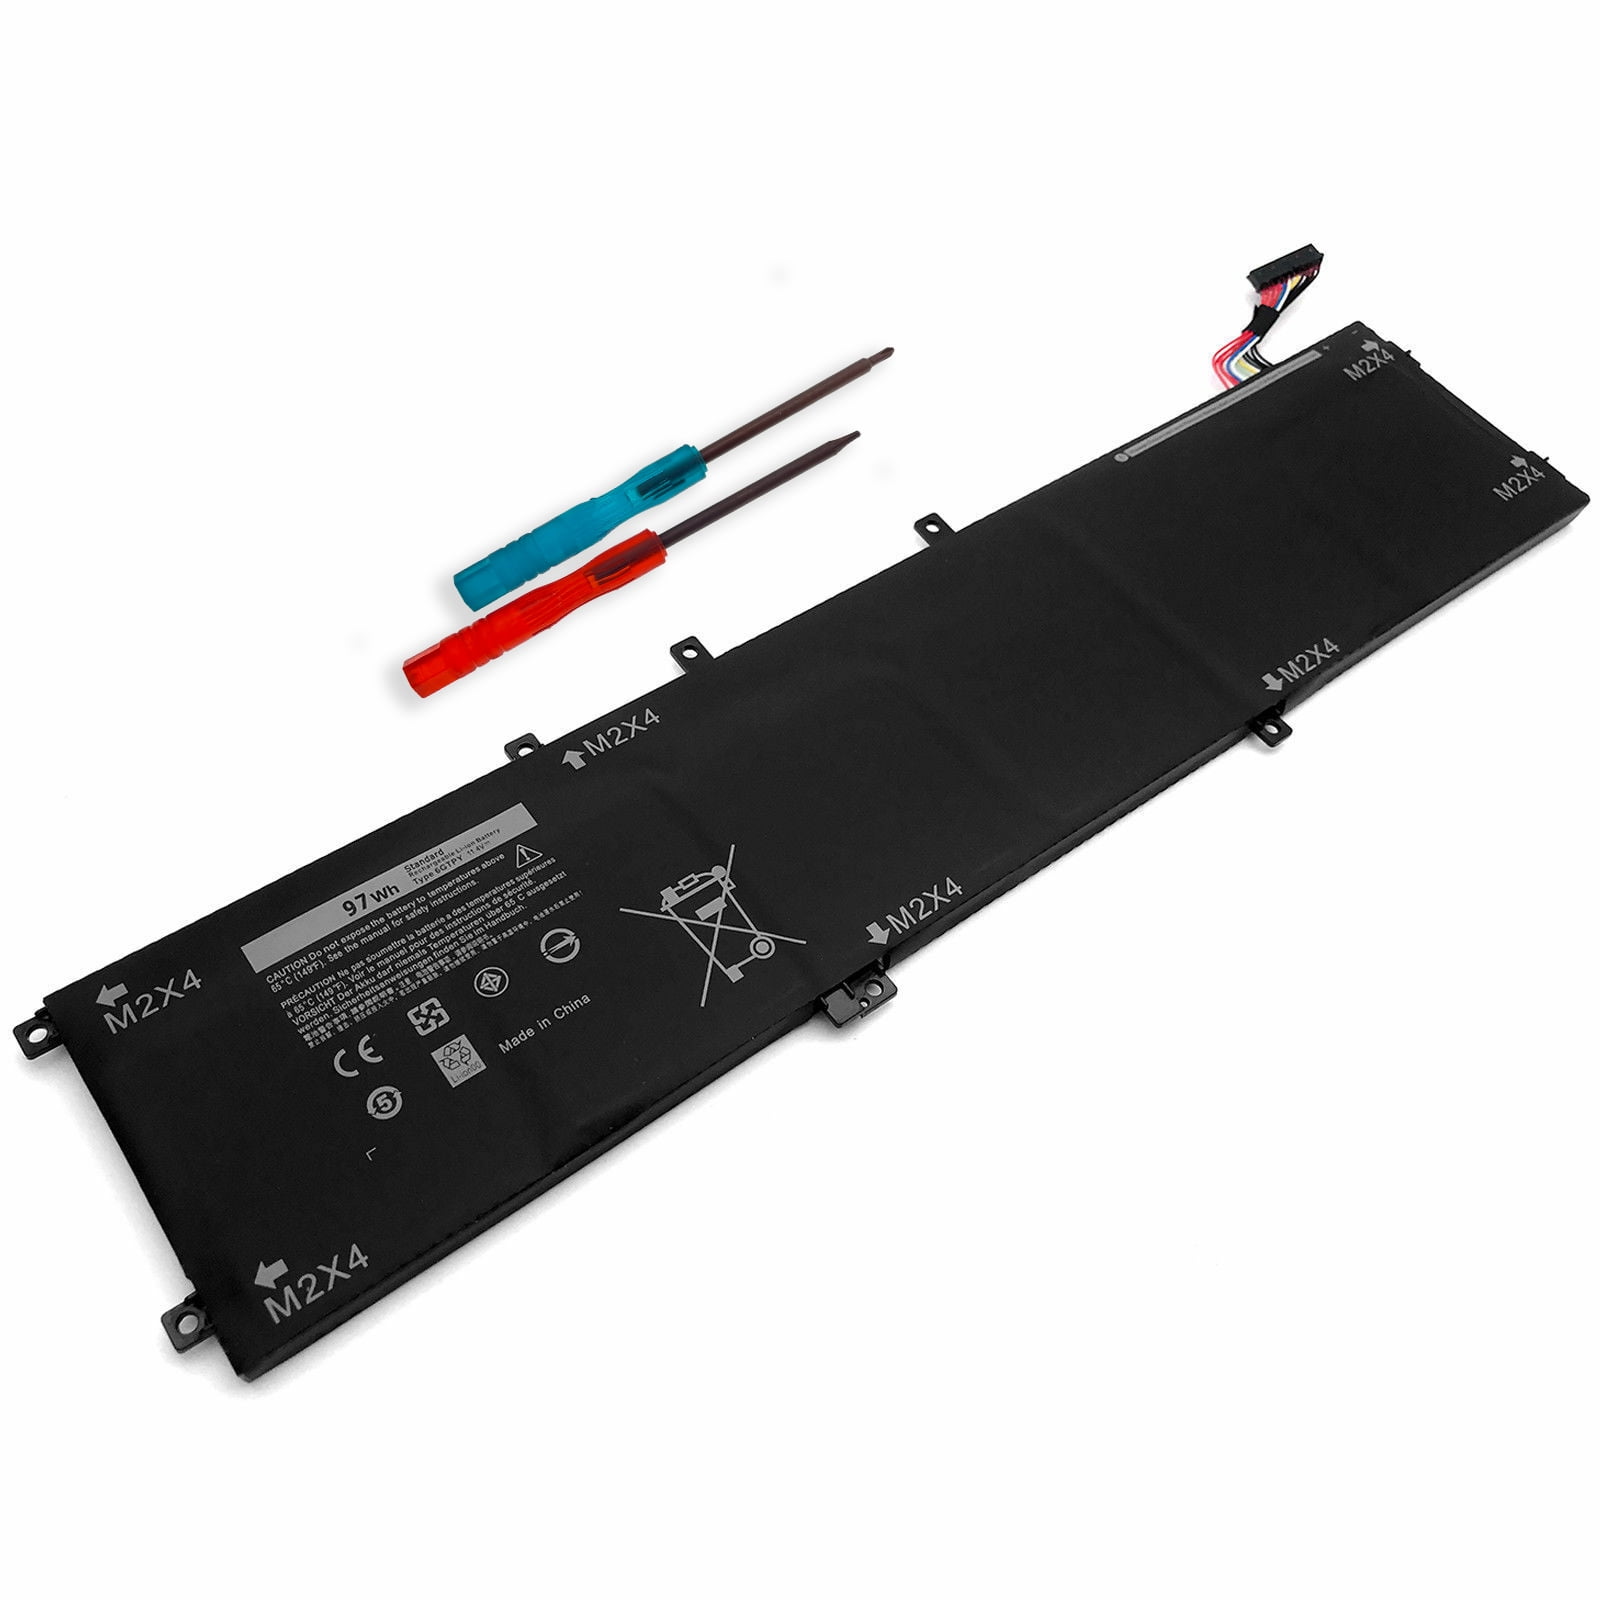 New 6-Cell 97Wh Extended Battery for Dell XPS 15 9560 9570 Precision 5520  5530 5XJ28 GPM03 6GTPY 